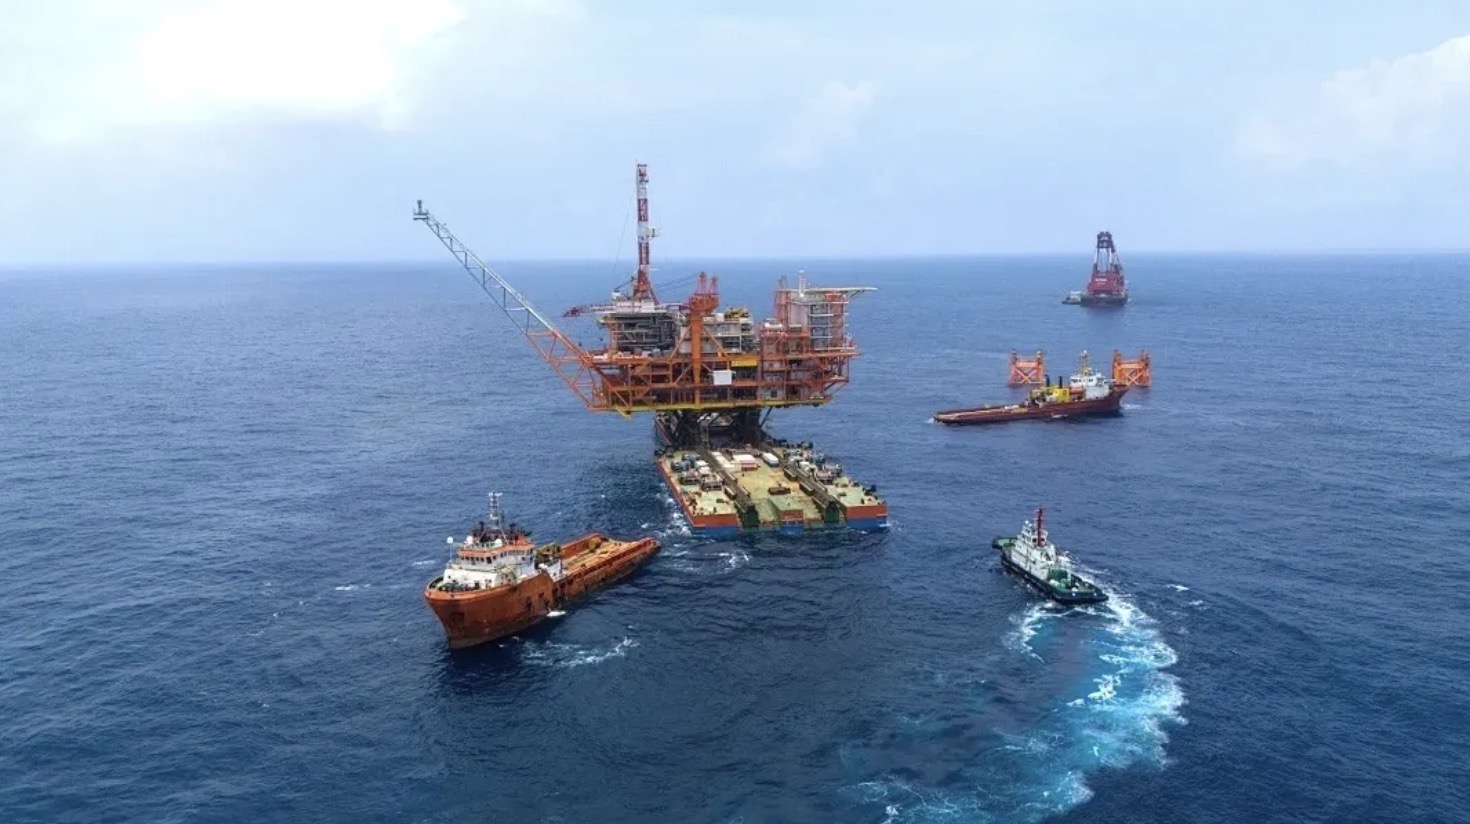 A view of China's first intelligent offshore drilling platform 